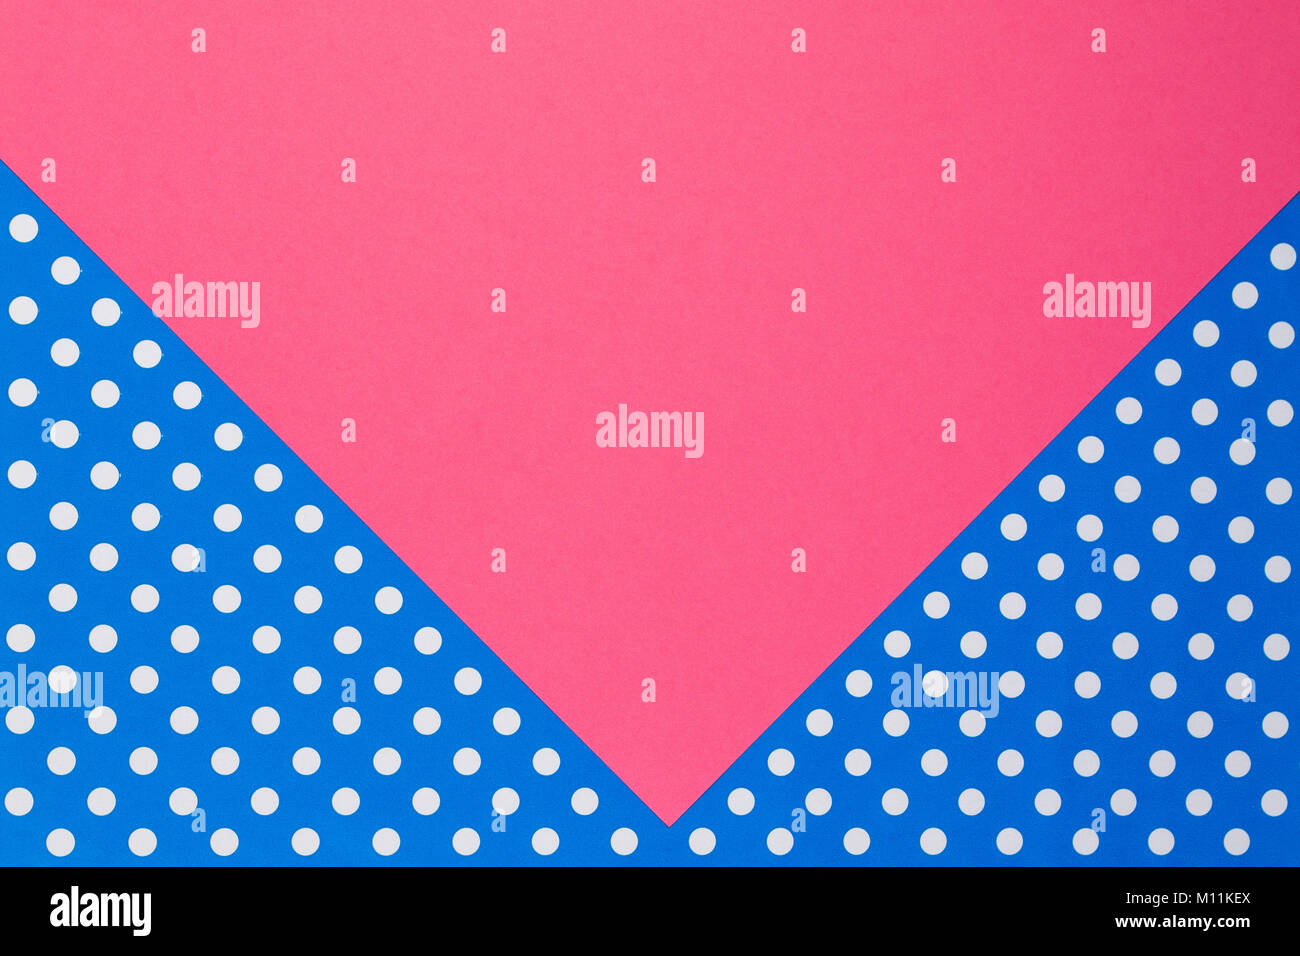 Abstract geometric pink and blue polka dot paper background. Stock Photo